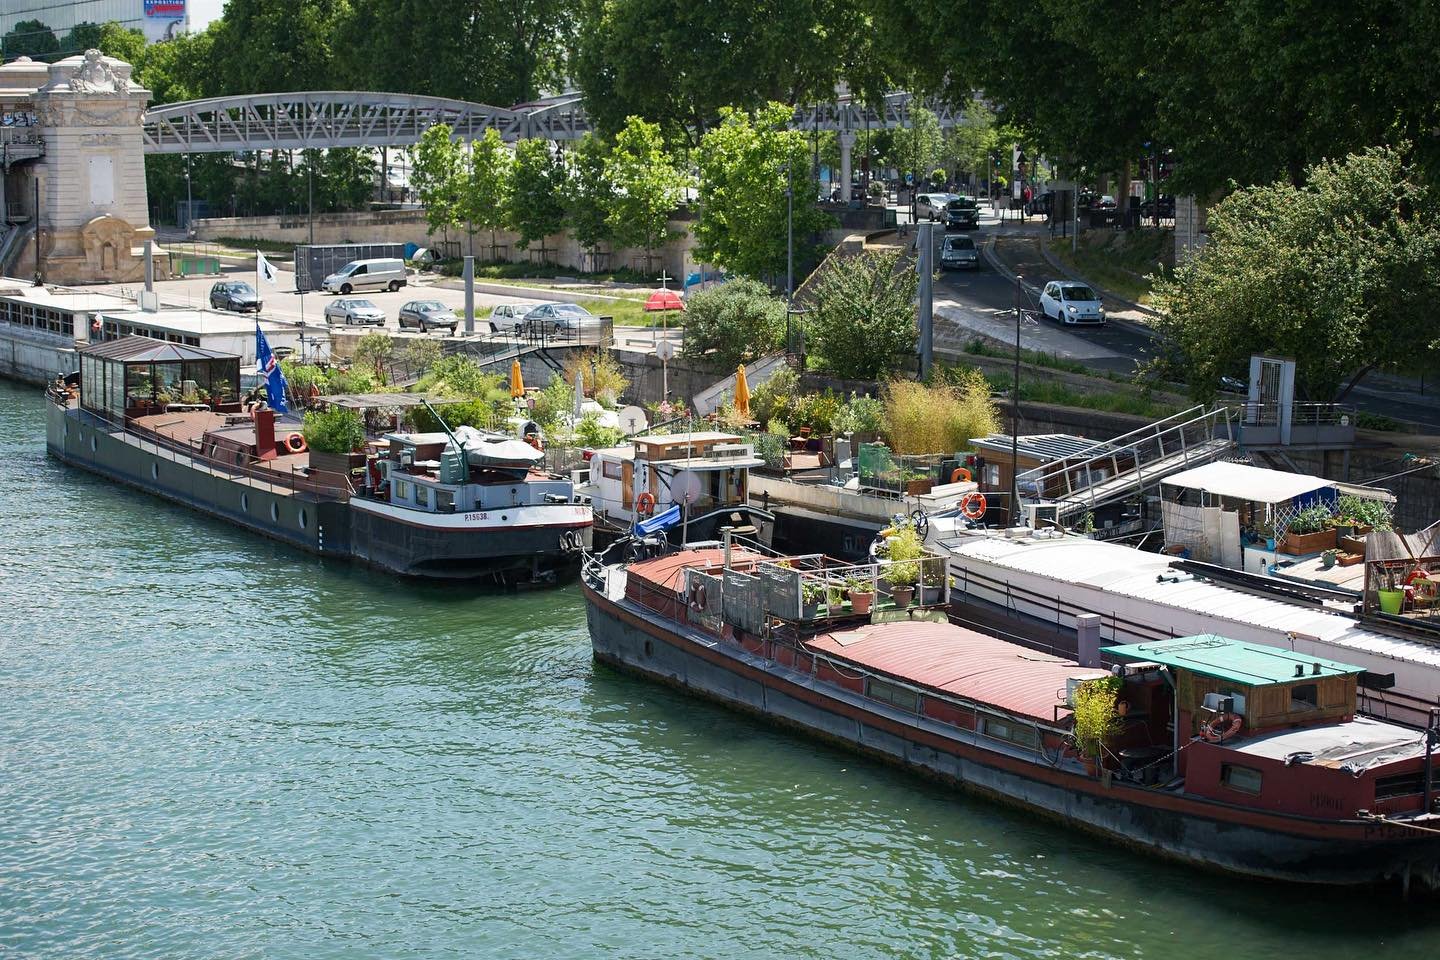 In Paris&rsquo; 10th arrondissement is Canal St Martin The canal is 4.6 km long and connects Canal de l&rsquo;Ourcq to the river Seine. The canal is popular for houseboats known as p&eacute;niches. But if you don&rsquo;t have your own boat, you can t